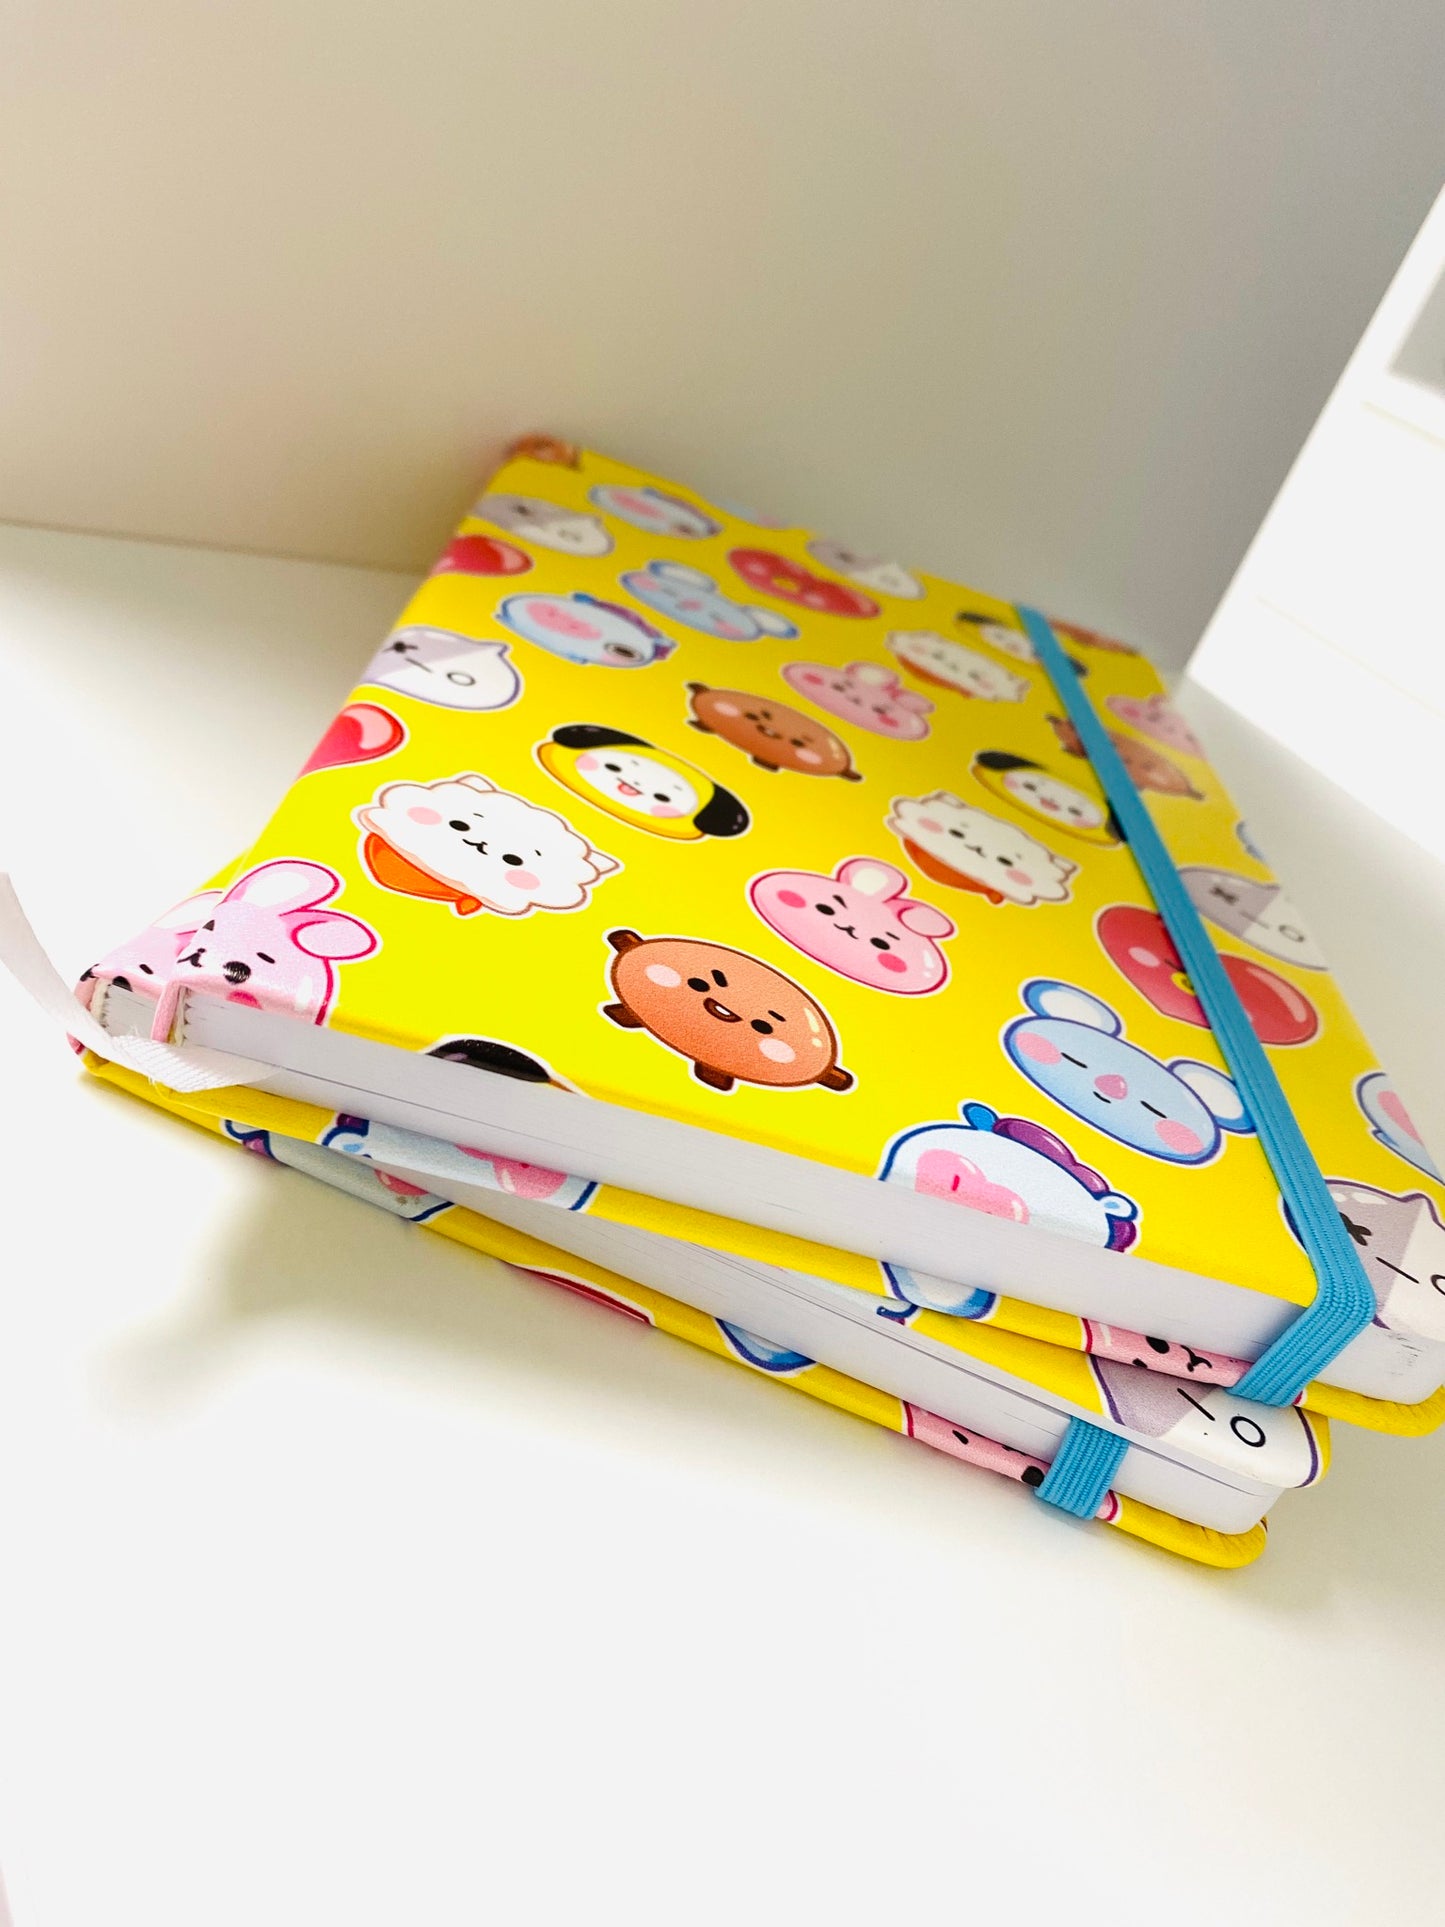 BT21 KPOP Dotted Notebook PU Faux leather Sketchbook 150gsm 40sheets/80pages Hard Cover